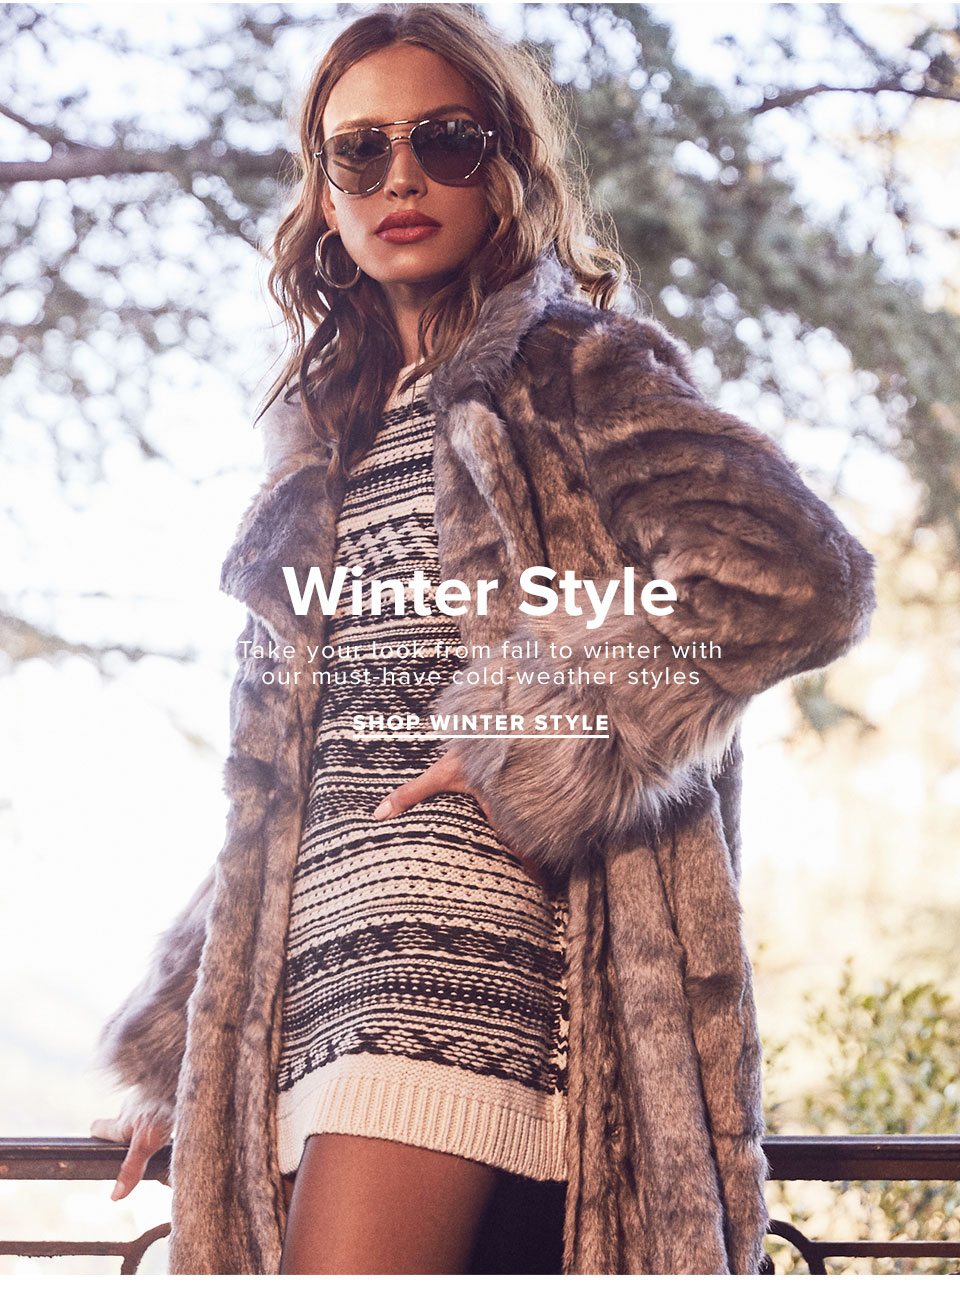 Winter Style. Take your look from fall to winter with our must-have cold-weather styles. Shop now